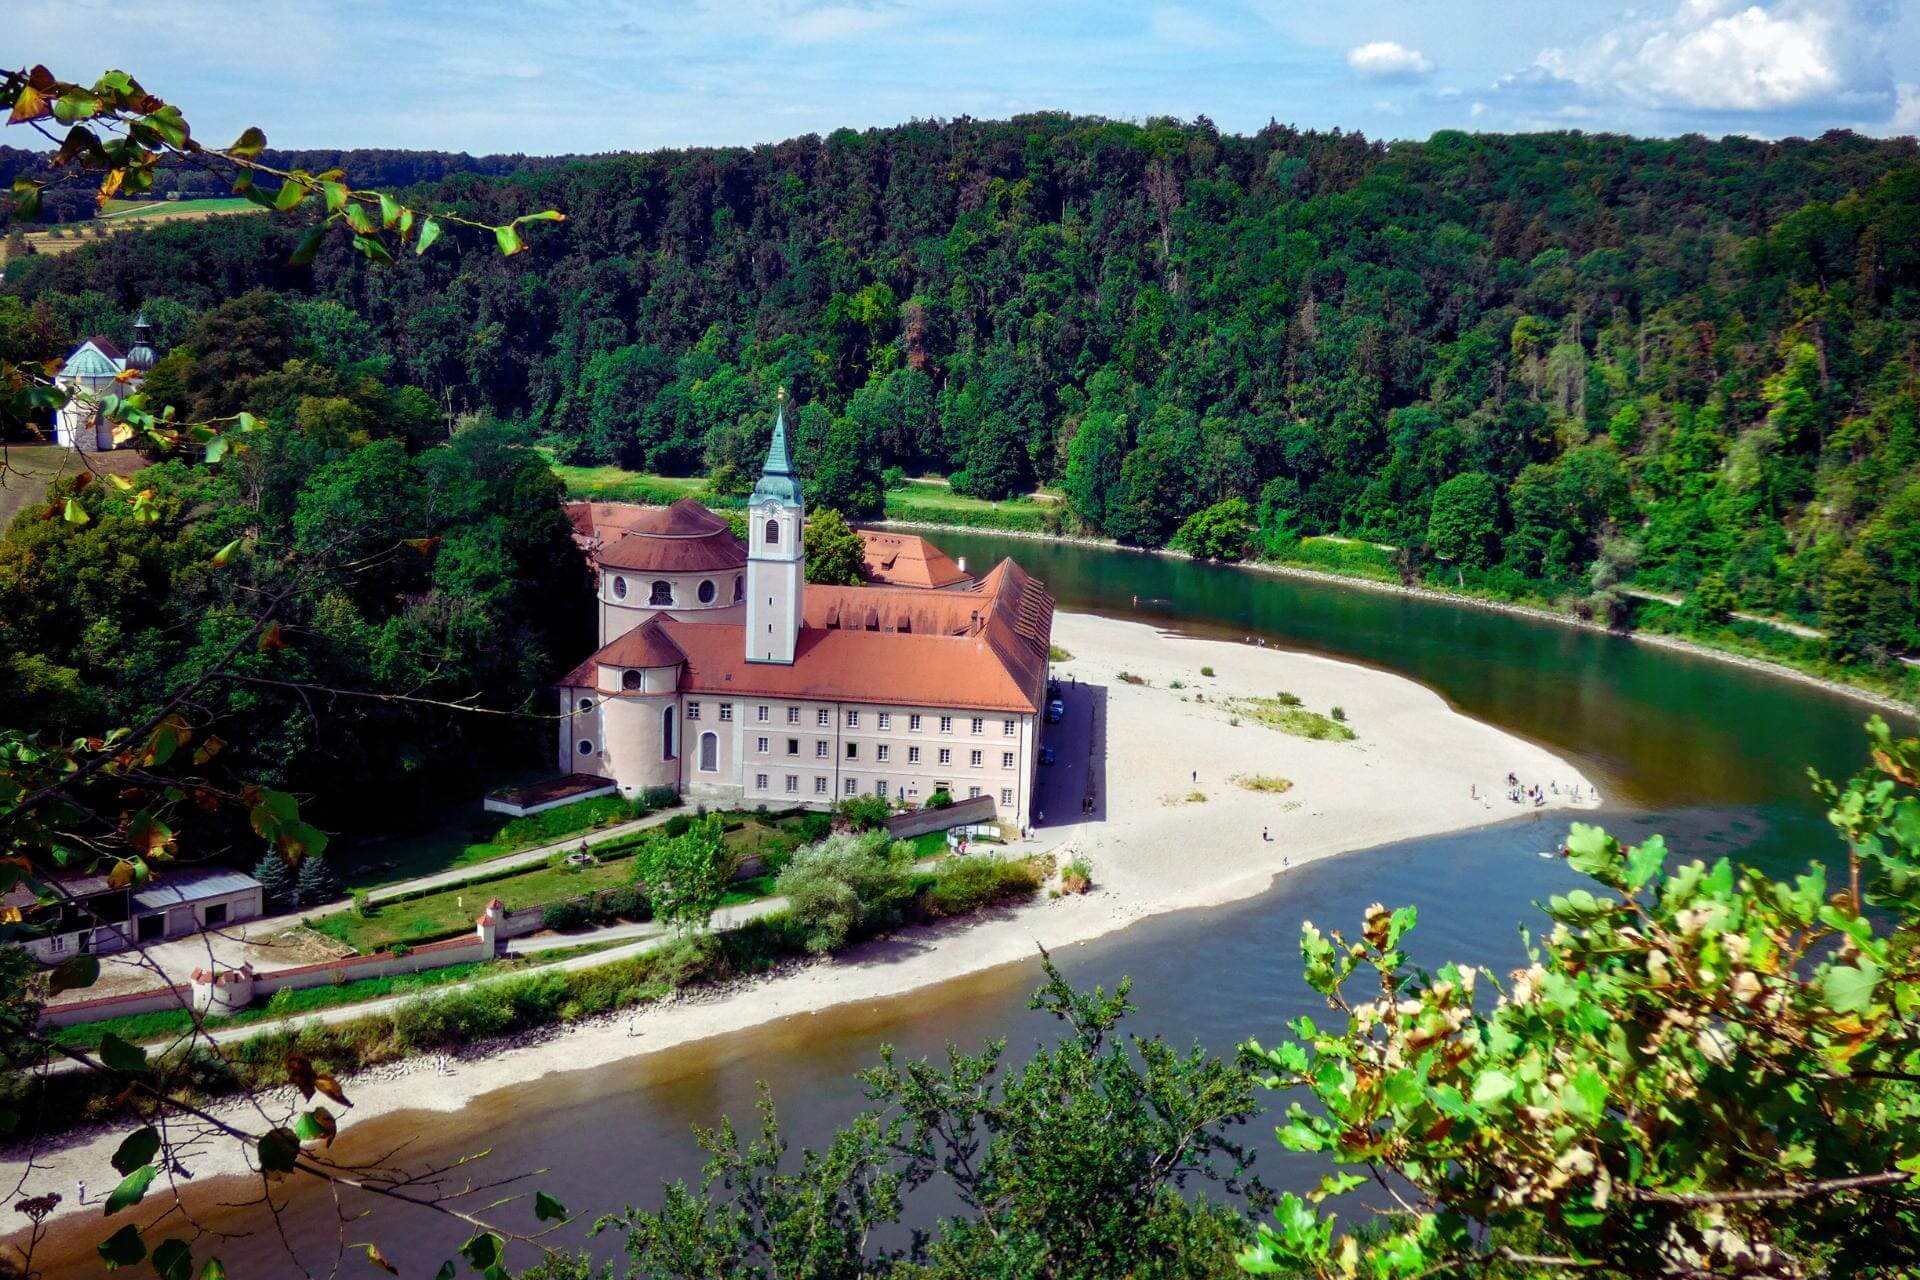 Most beautiful regions of Germany - Altmühltal - View of Weltenburg Abbey from the vantage point on the panoramic trail above the Danube - angiestravelroutes.com